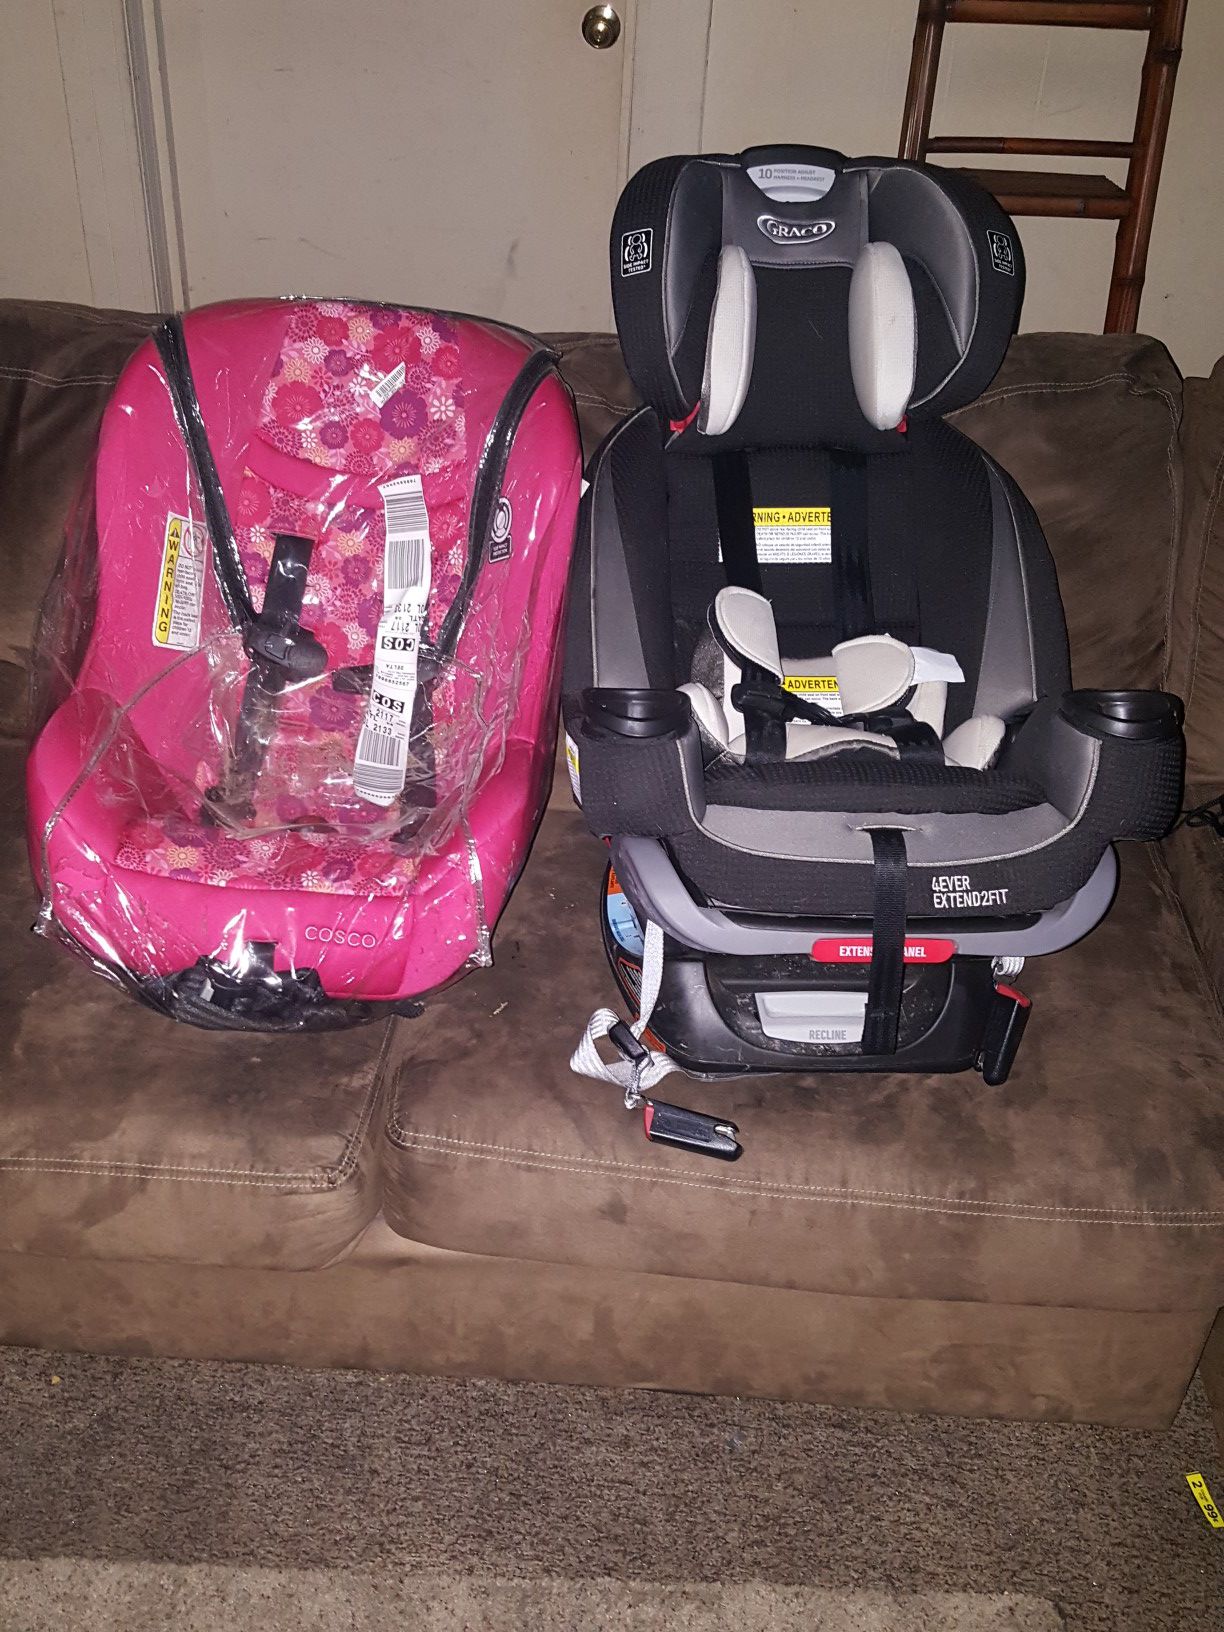 Graco 4ever Extend2Fit & Cosco Scenera Next Convertible Car Seat, Orchard Blossom Pink, both for $200